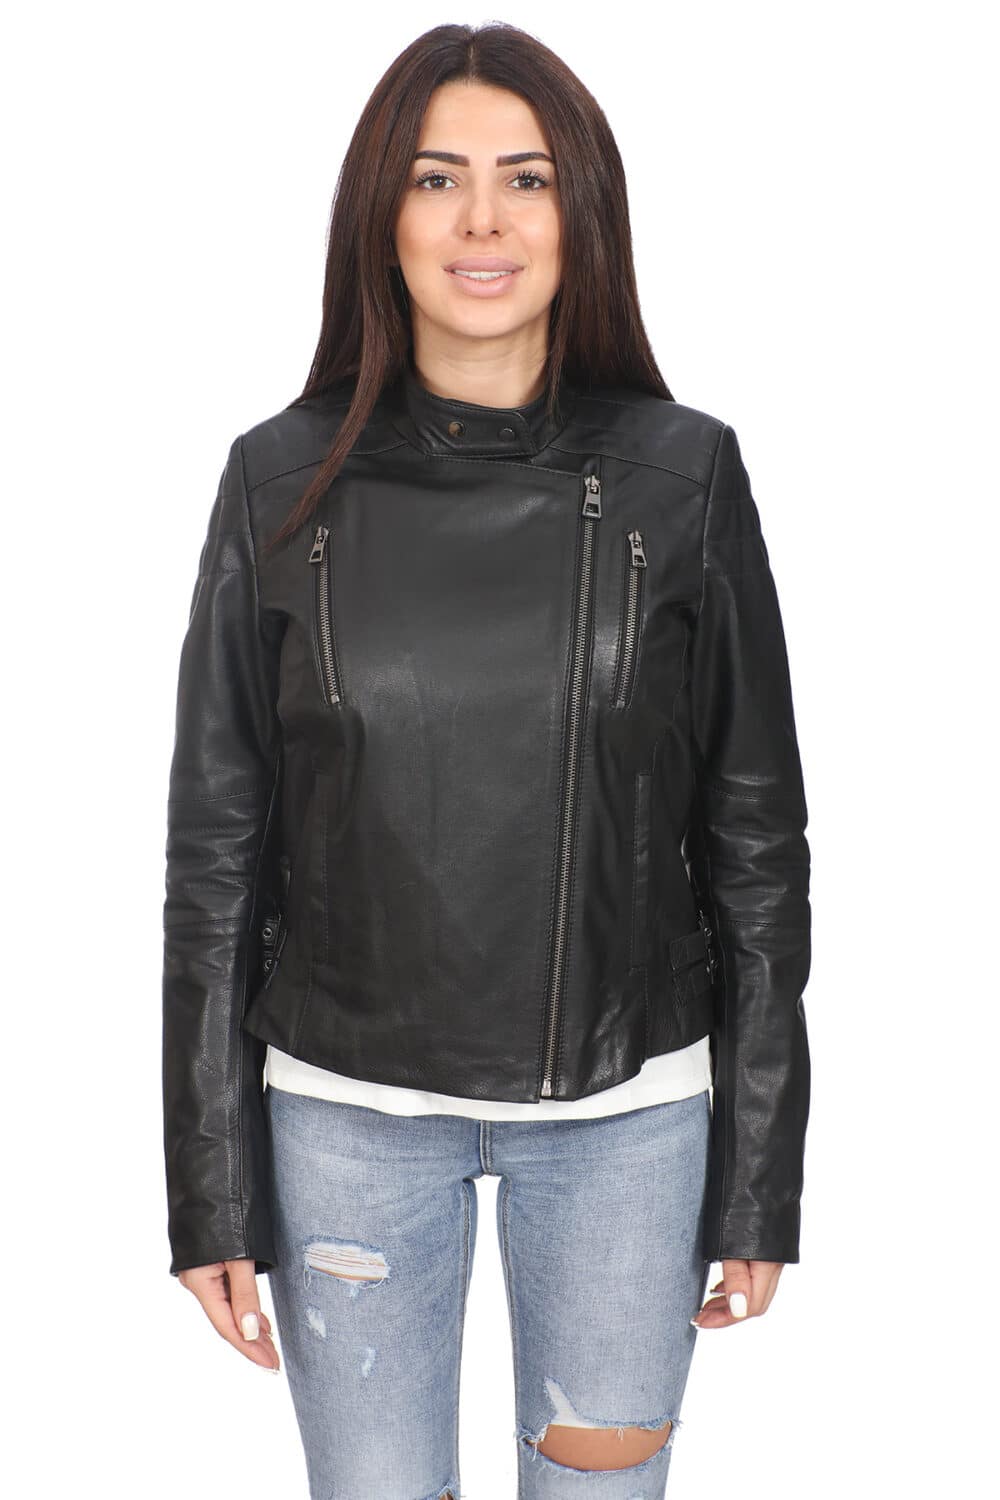 Waxed Brown Leather Coat Women - Long Coat for Sale in Texas